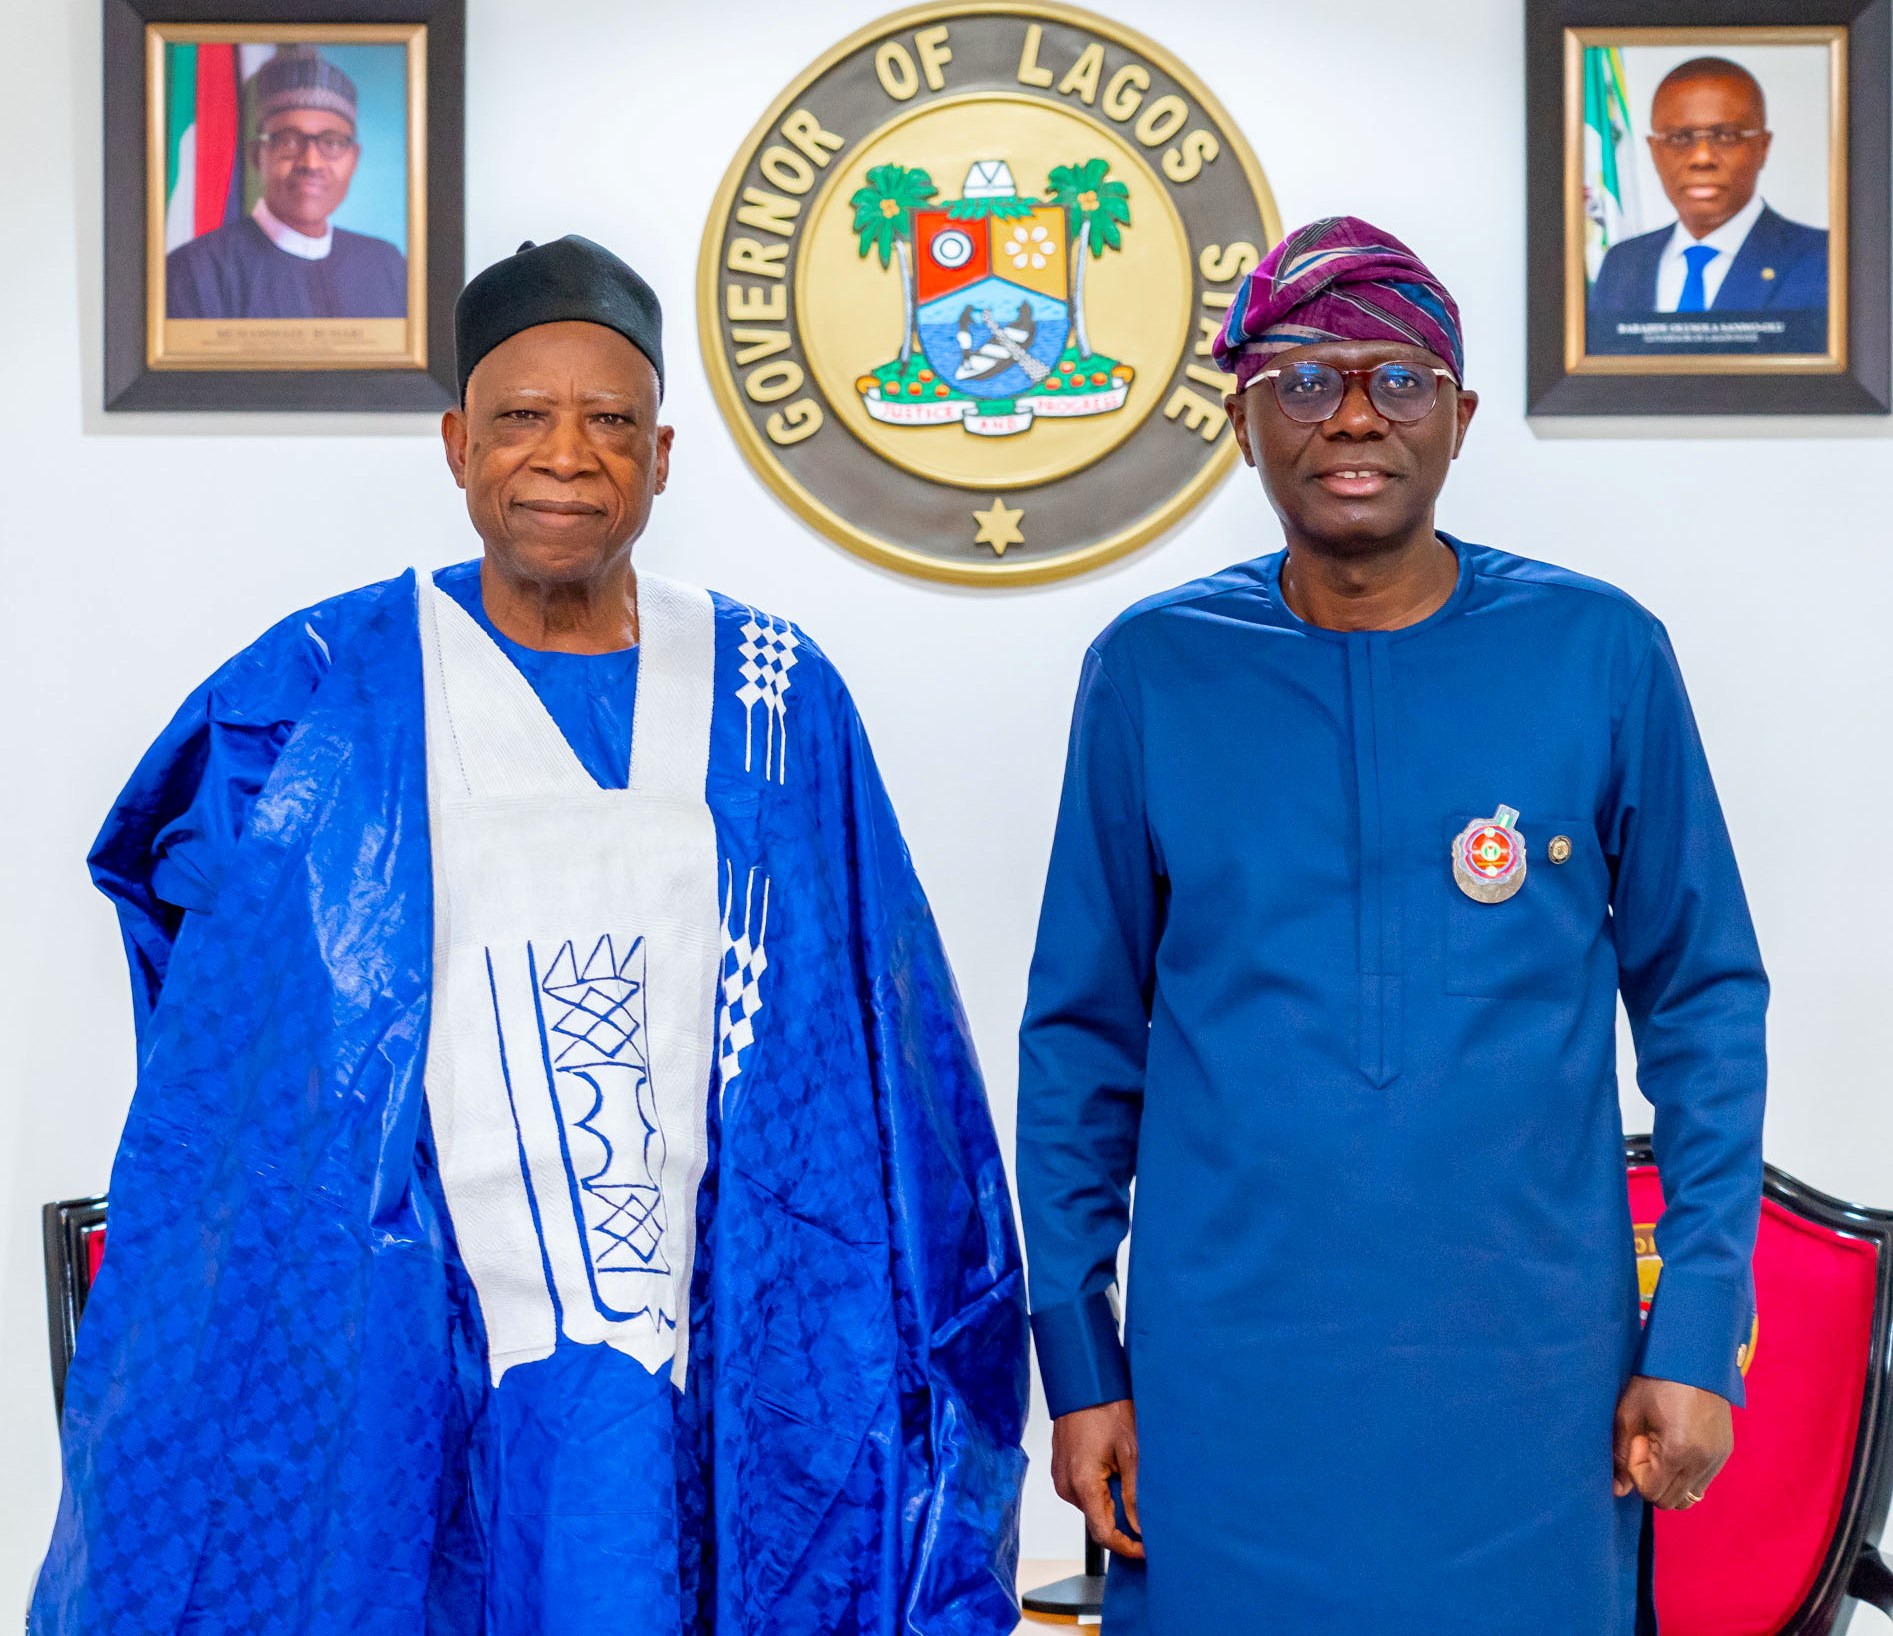 SANWO-OLU CHARGES APC RECONCILIATION COMMITTEE TO UNITE PARTY MEMBERS